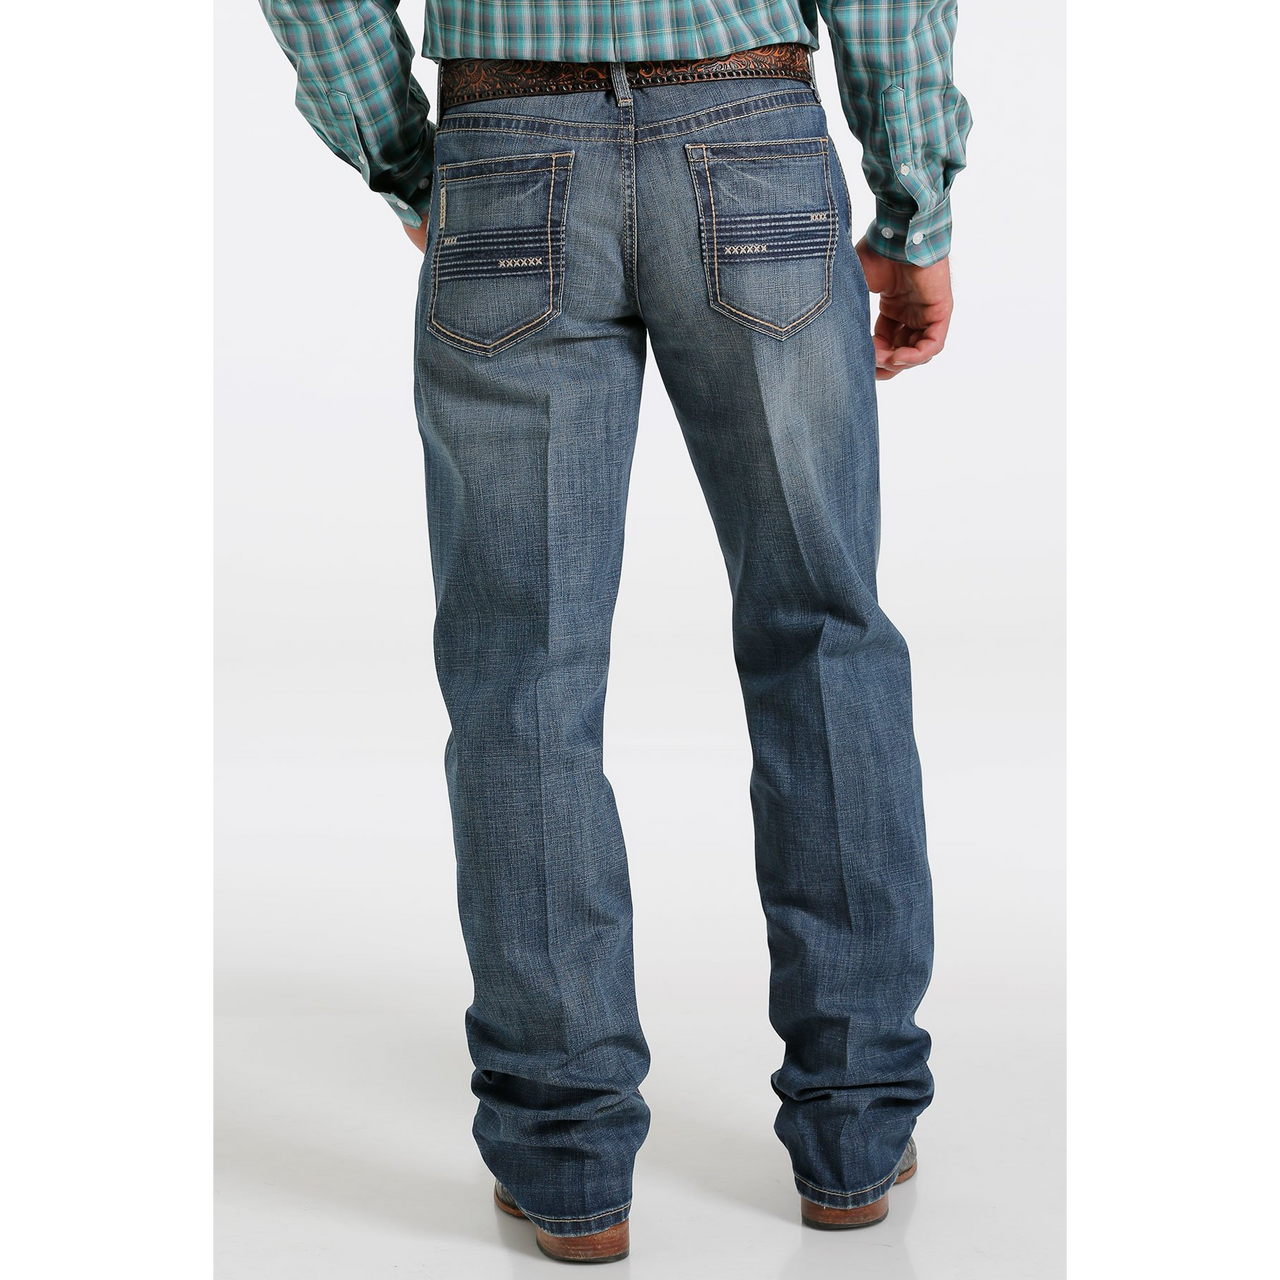 Cinch Men's Relaxed Fit Grant Jeans - Dark Stonewash